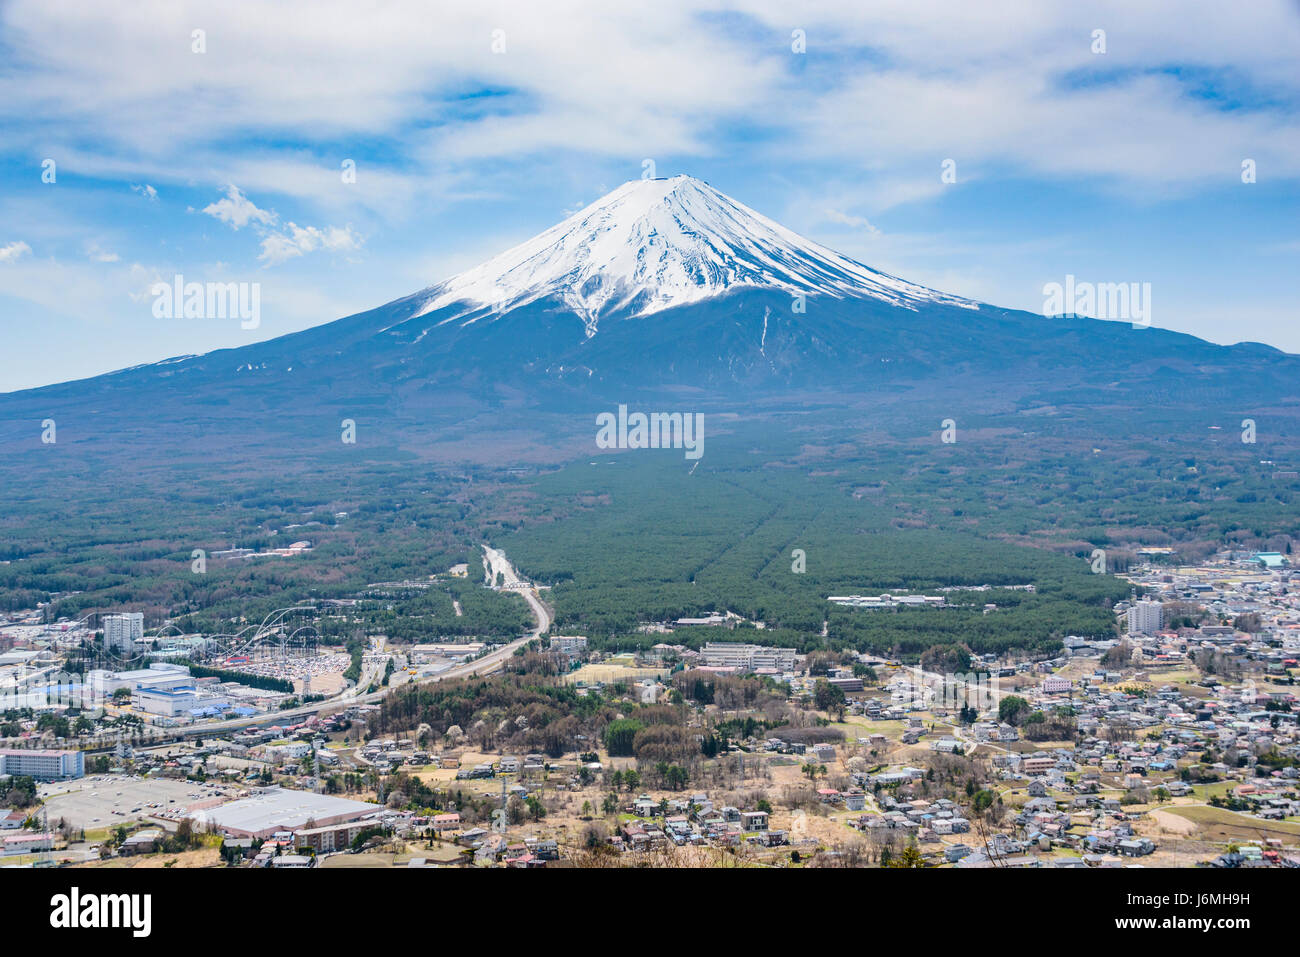 Mount Fuji viewed from Mount Tenjo.Iconic view of this famous mountain. Stock Photo